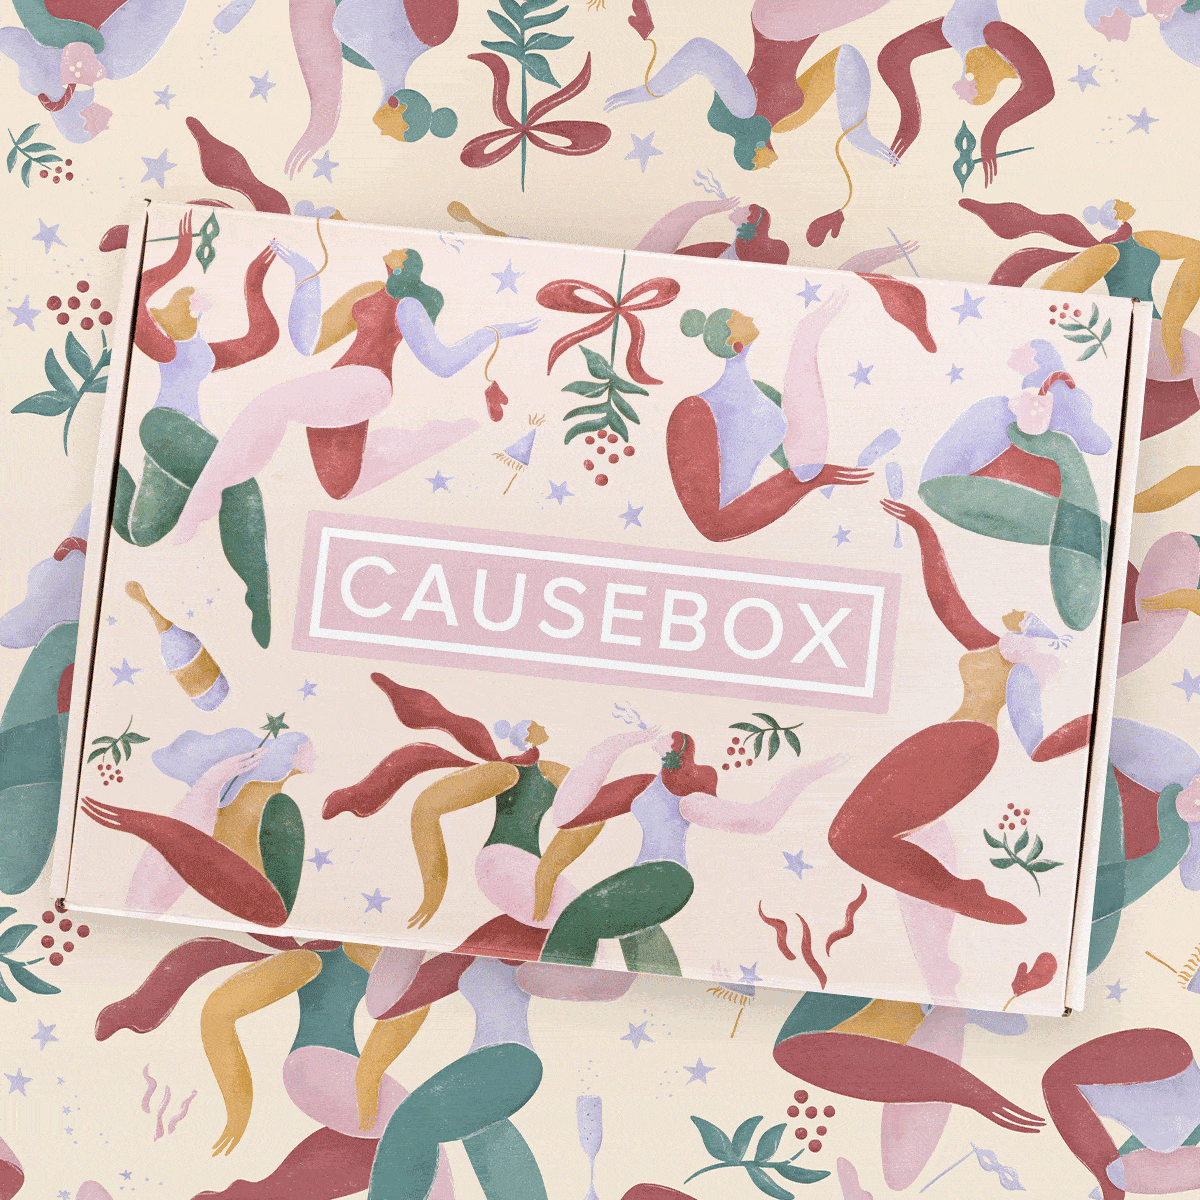 CAUSEBOX Winter 2019 Box On Sale Now + Coupon Code!